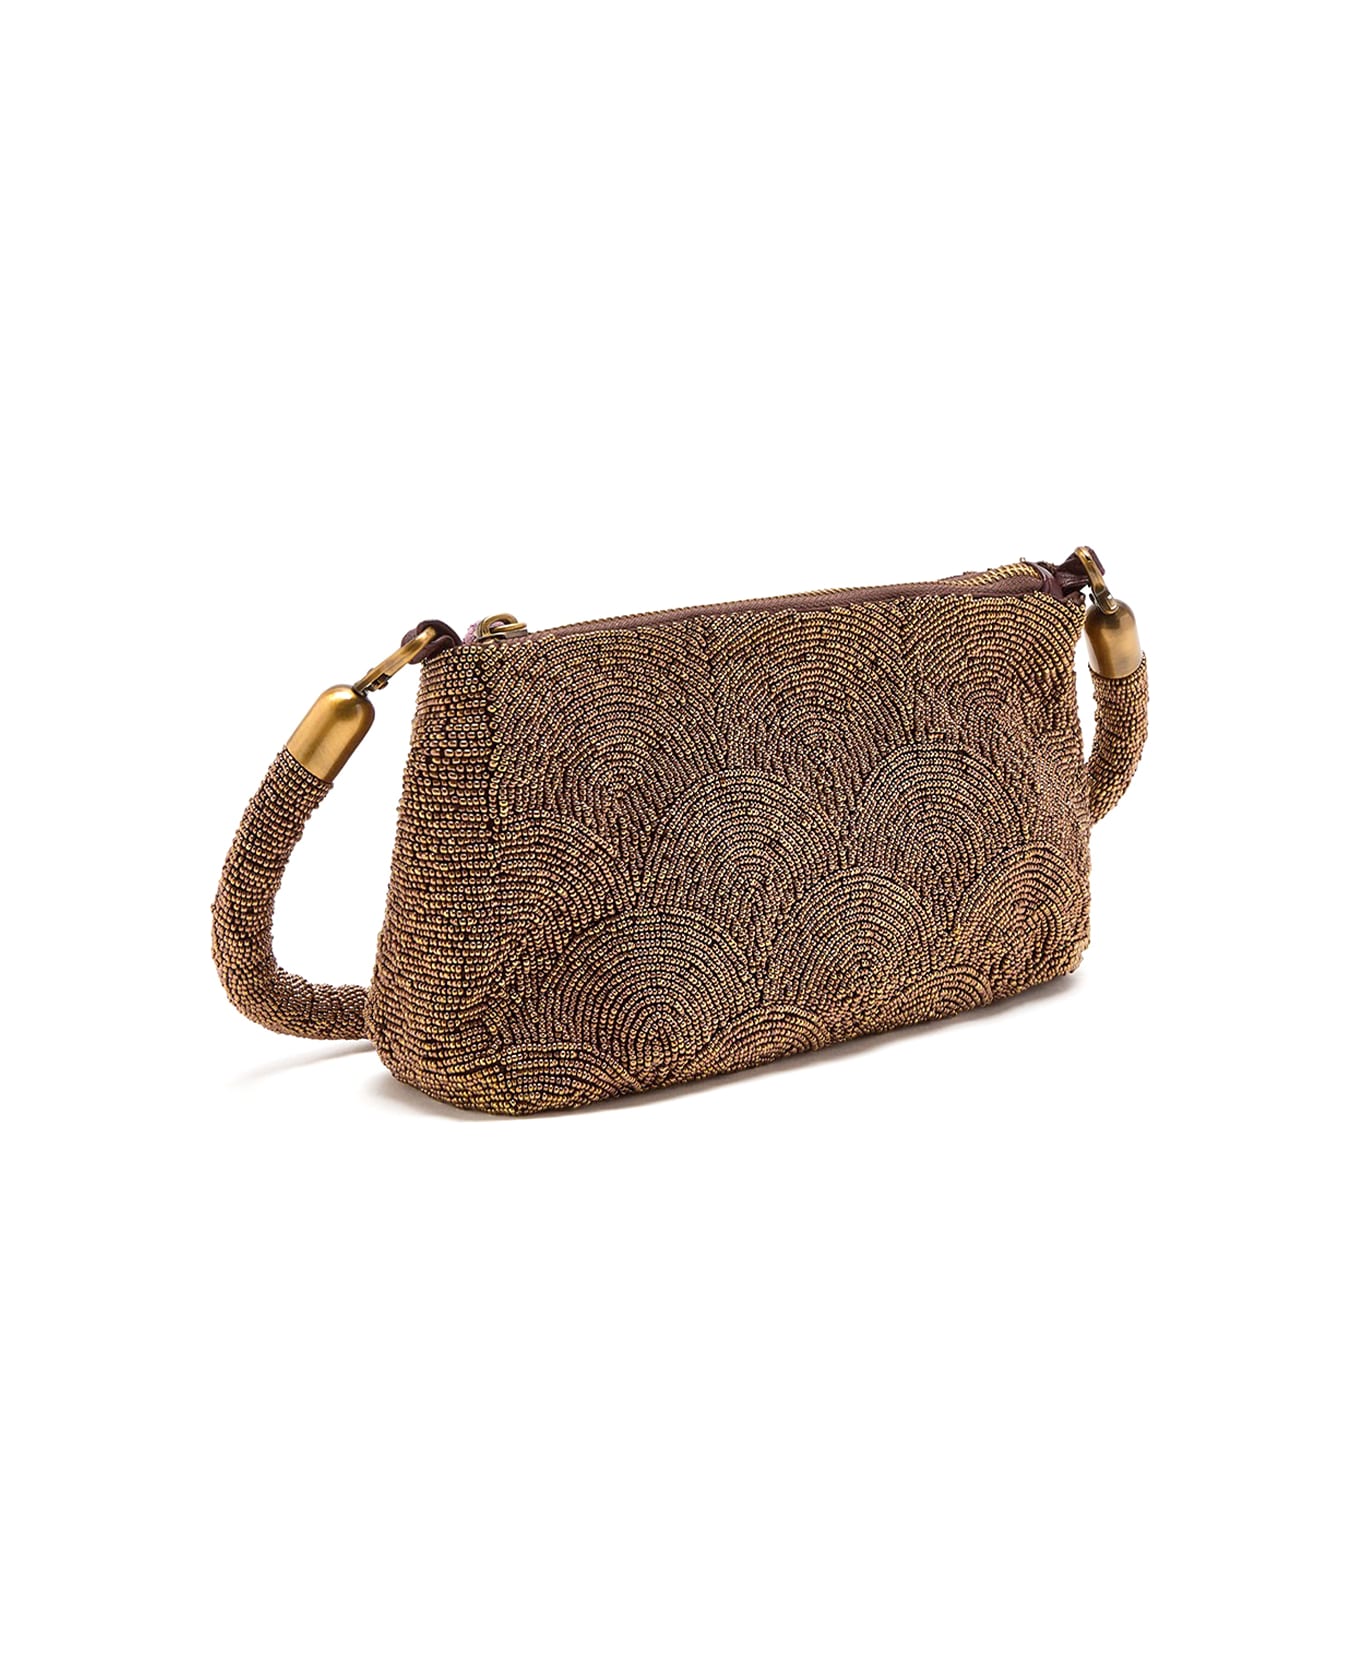 Malìparmi Shoulder Bag With Hand-embroidered Beads - BRONZO